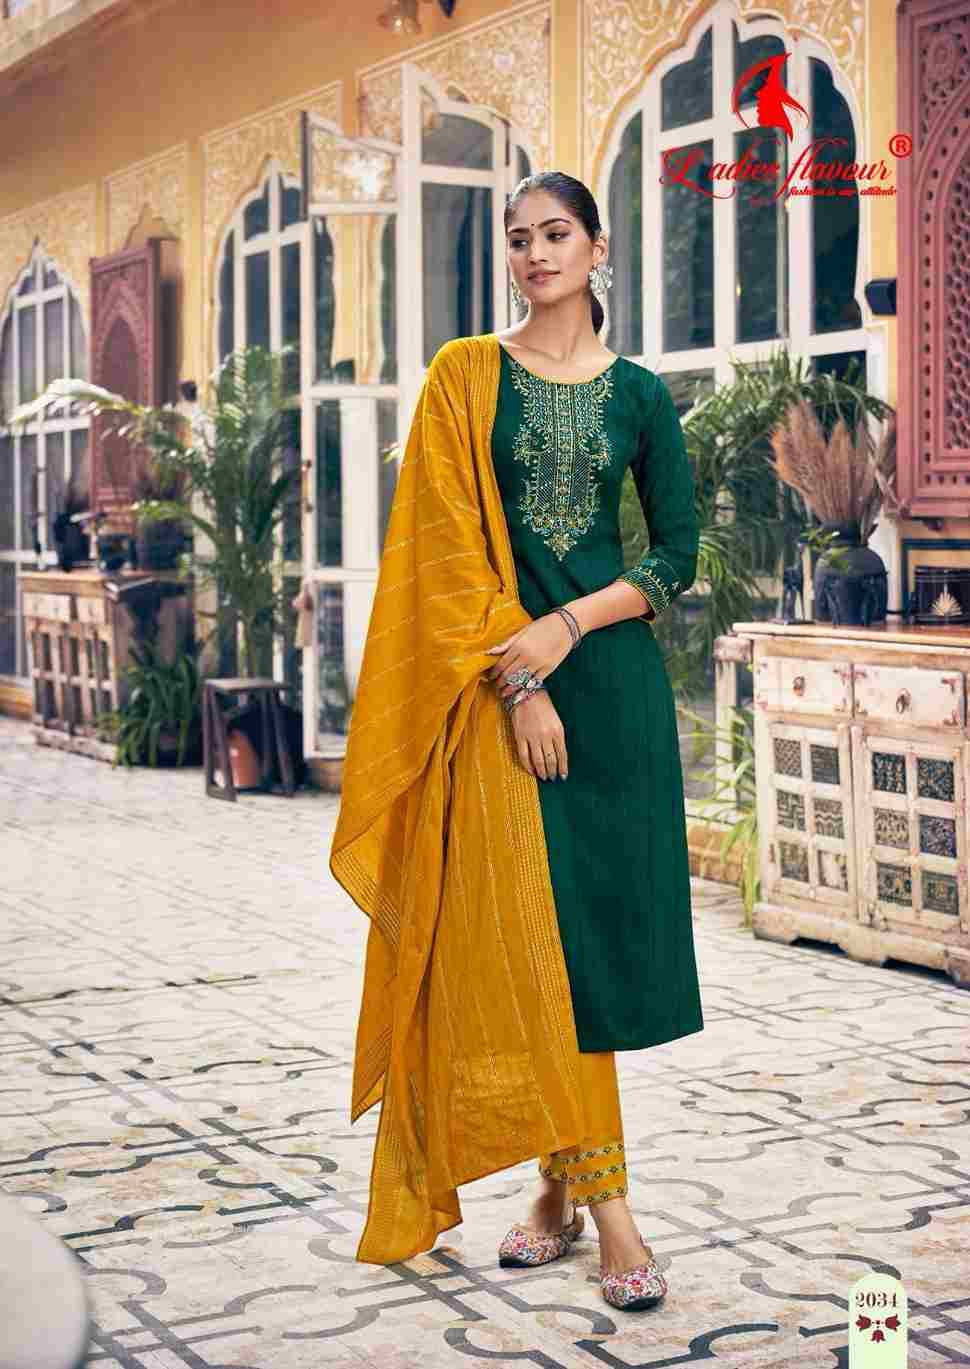 Parampara Vol-2 By Ladies Flavour 2031 To 2036 Series Beautiful Festive Suits Colorful Stylish Fancy Casual Wear & Ethnic Wear Chinnon Dresses At Wholesale Price